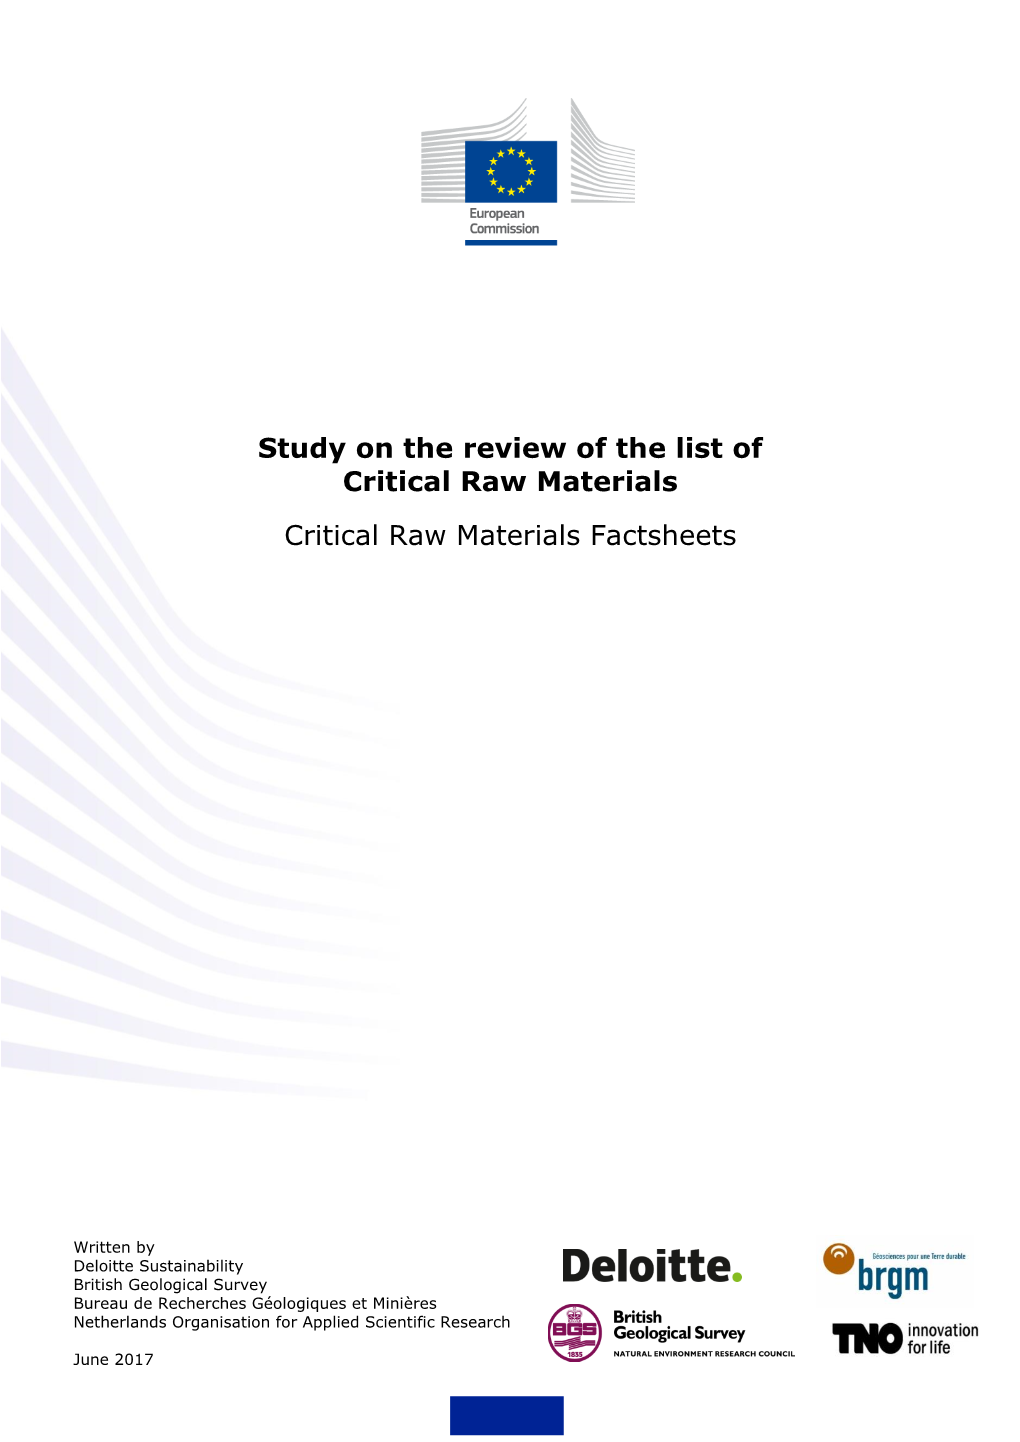 Study on the Review of the List of Critical Raw Materials Critical Raw Materials Factsheets